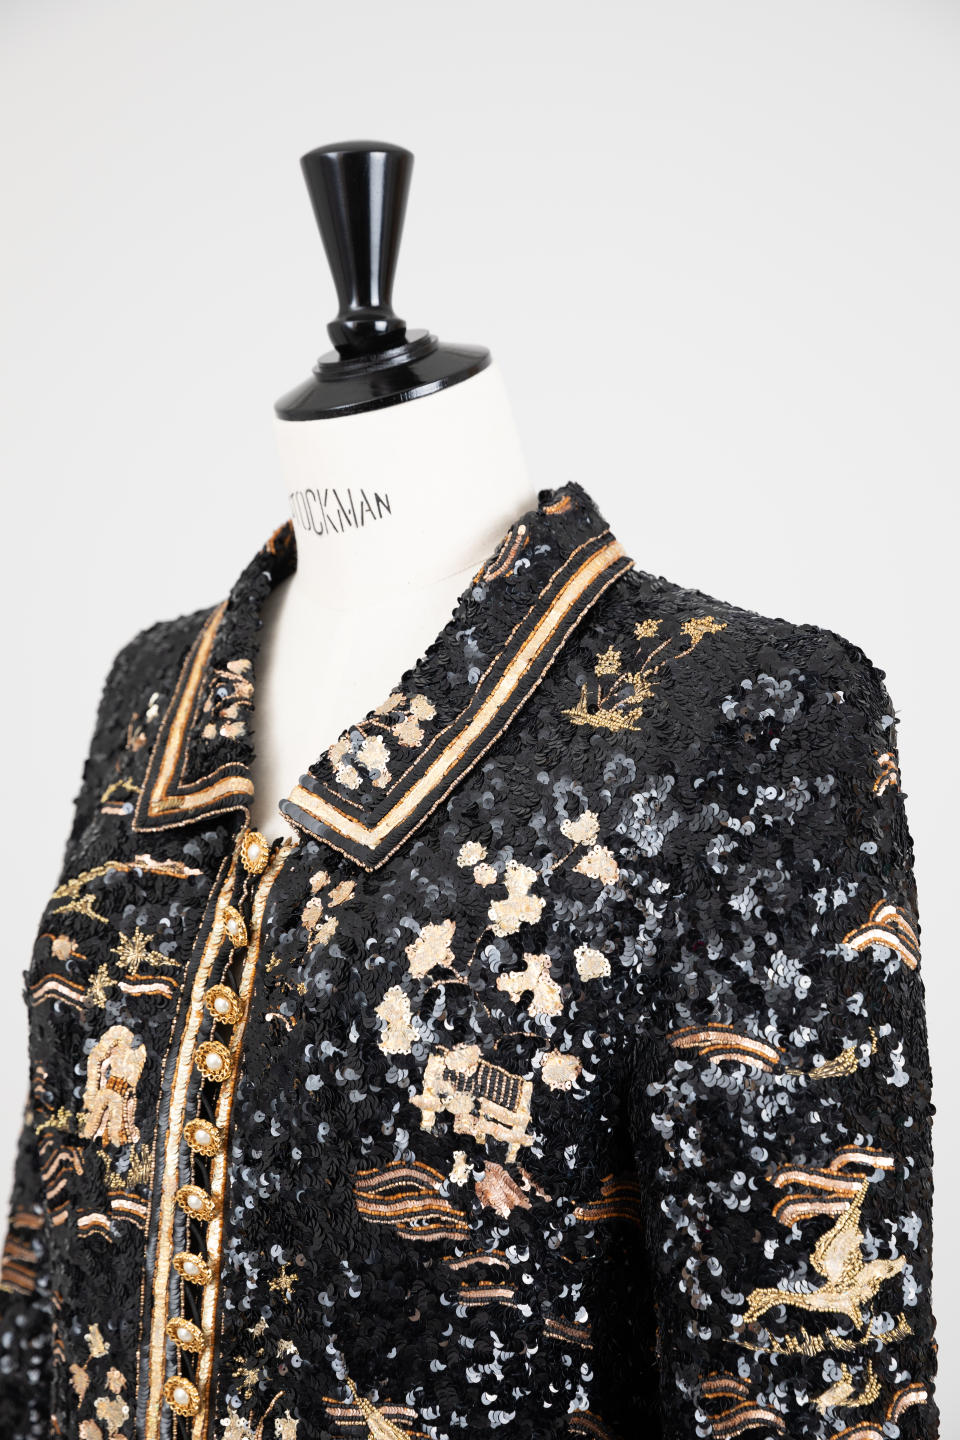 A “Coromandel” coat by Karl Lagerfeld from Chanel’s winter 1996 haute couture collection.